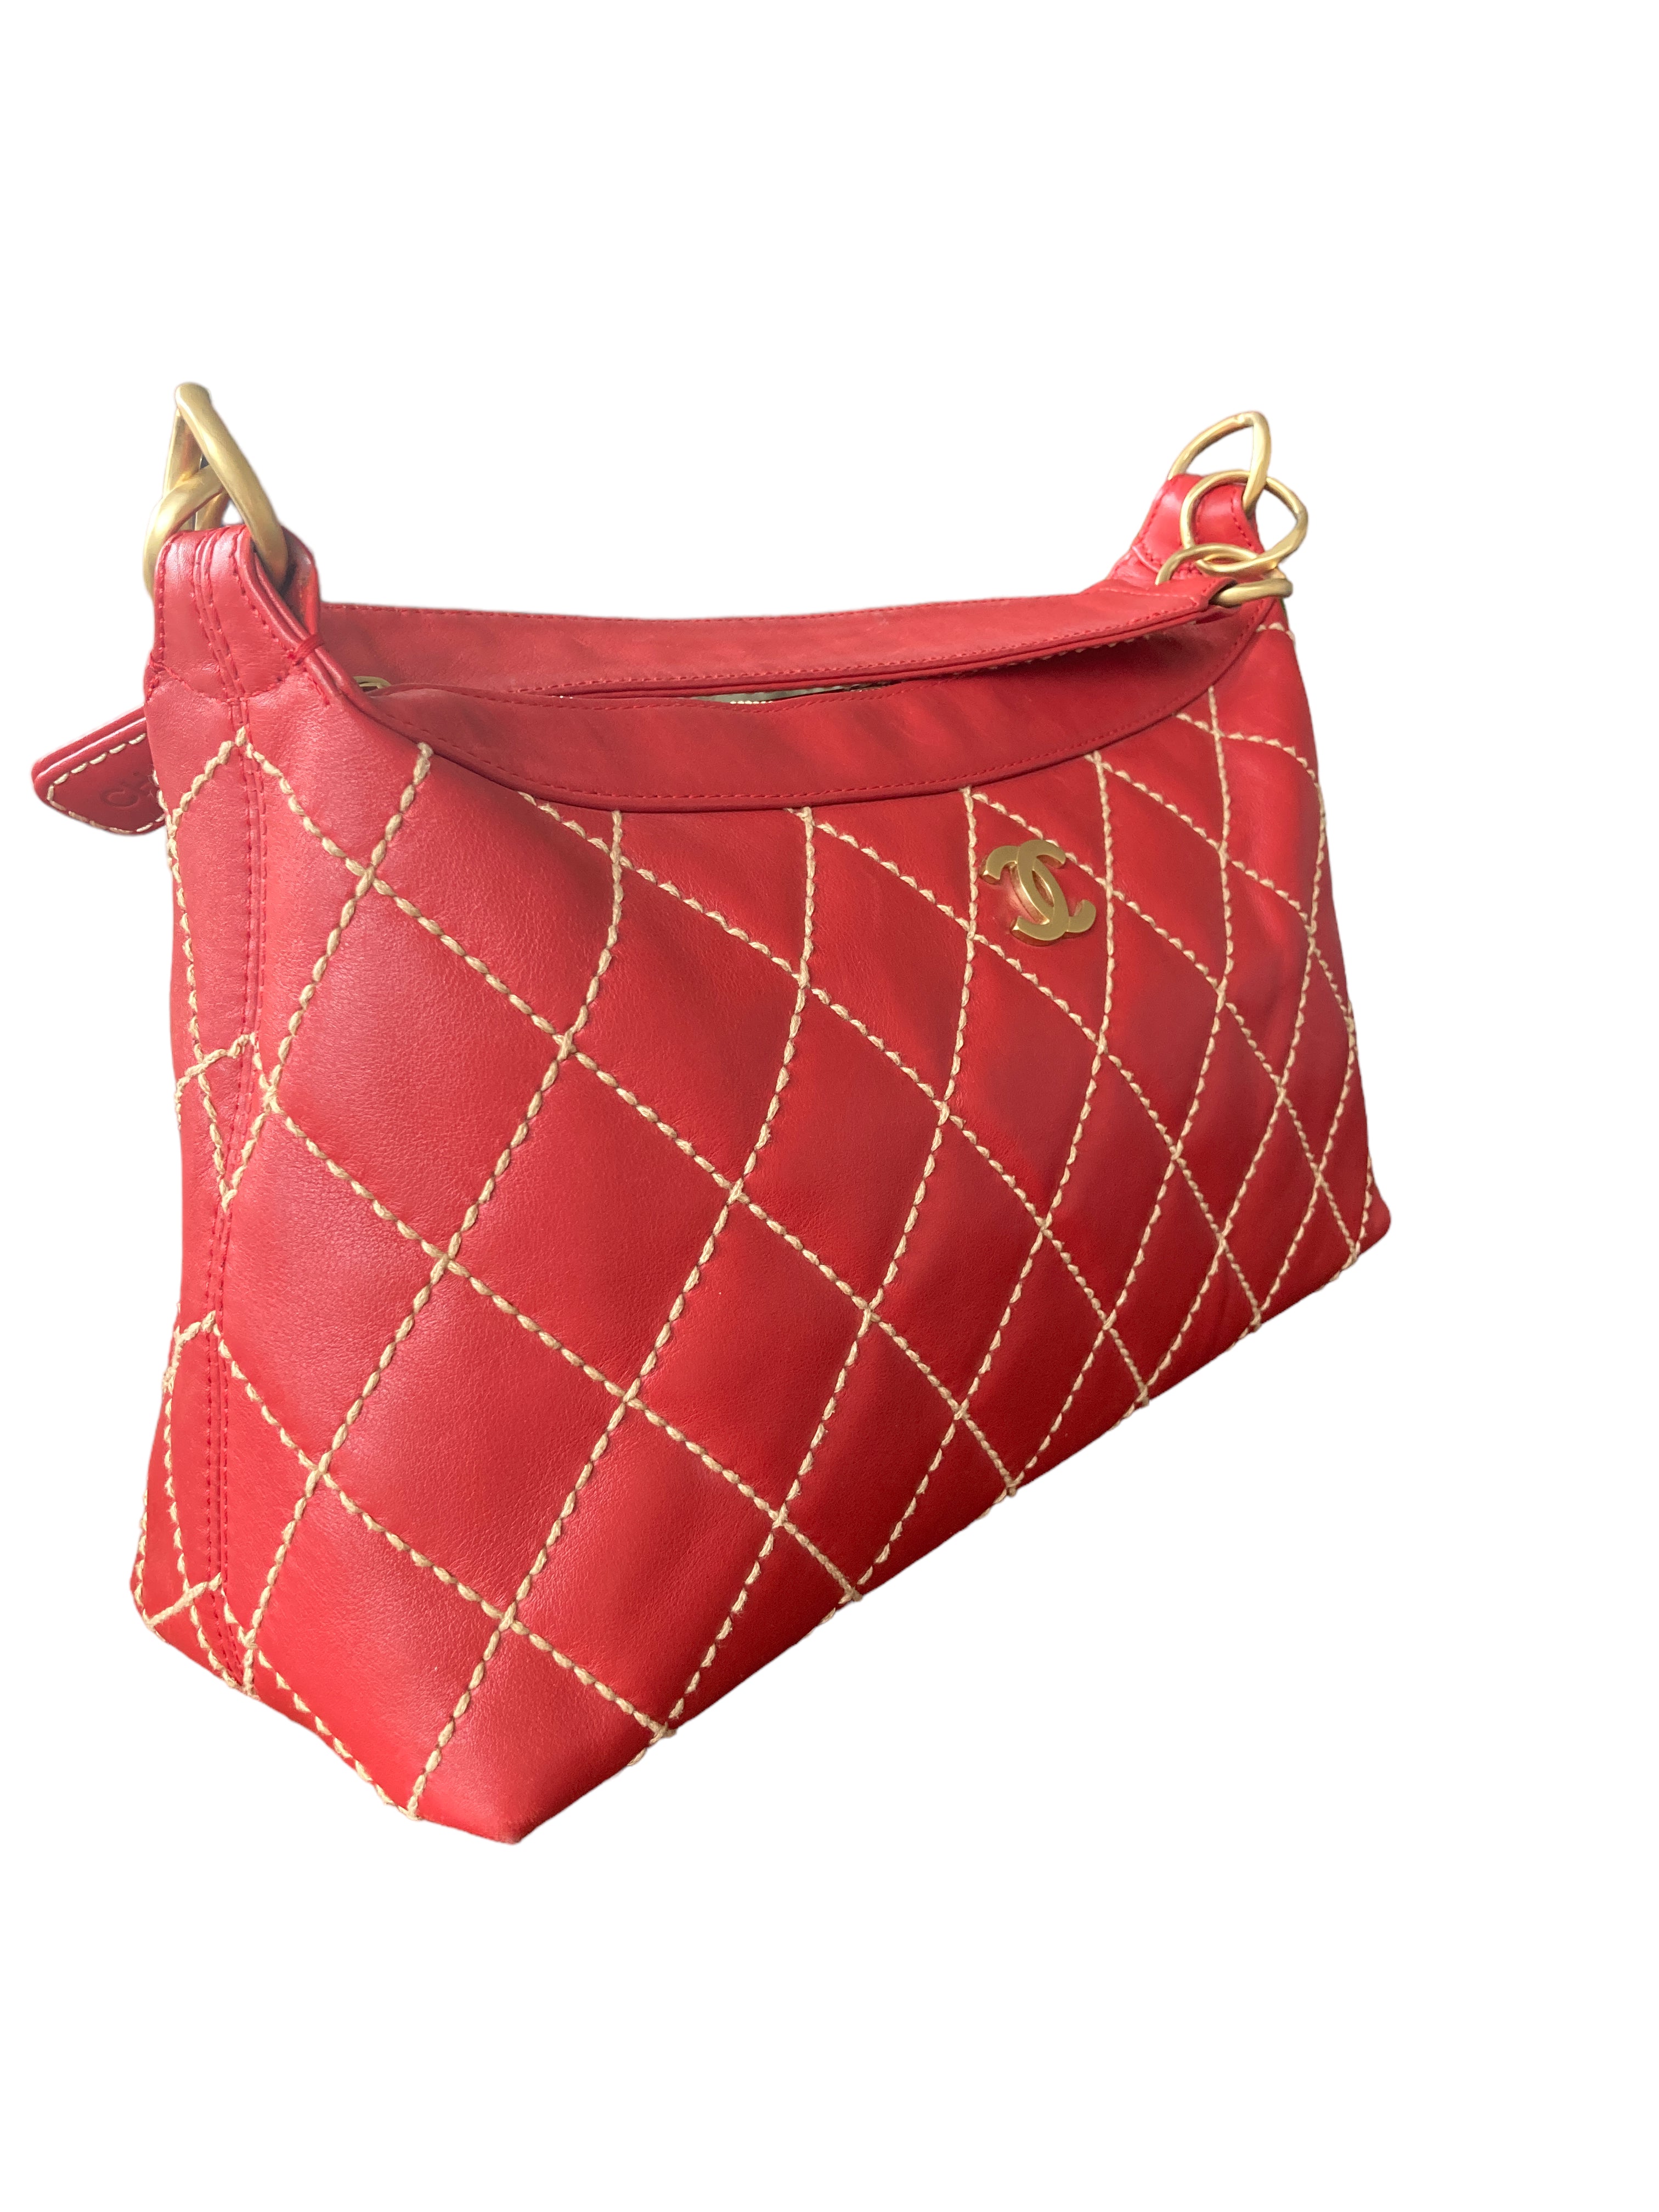 Chanel Vintage Quilted Surpique Hobo Authenticated Handbag, Red